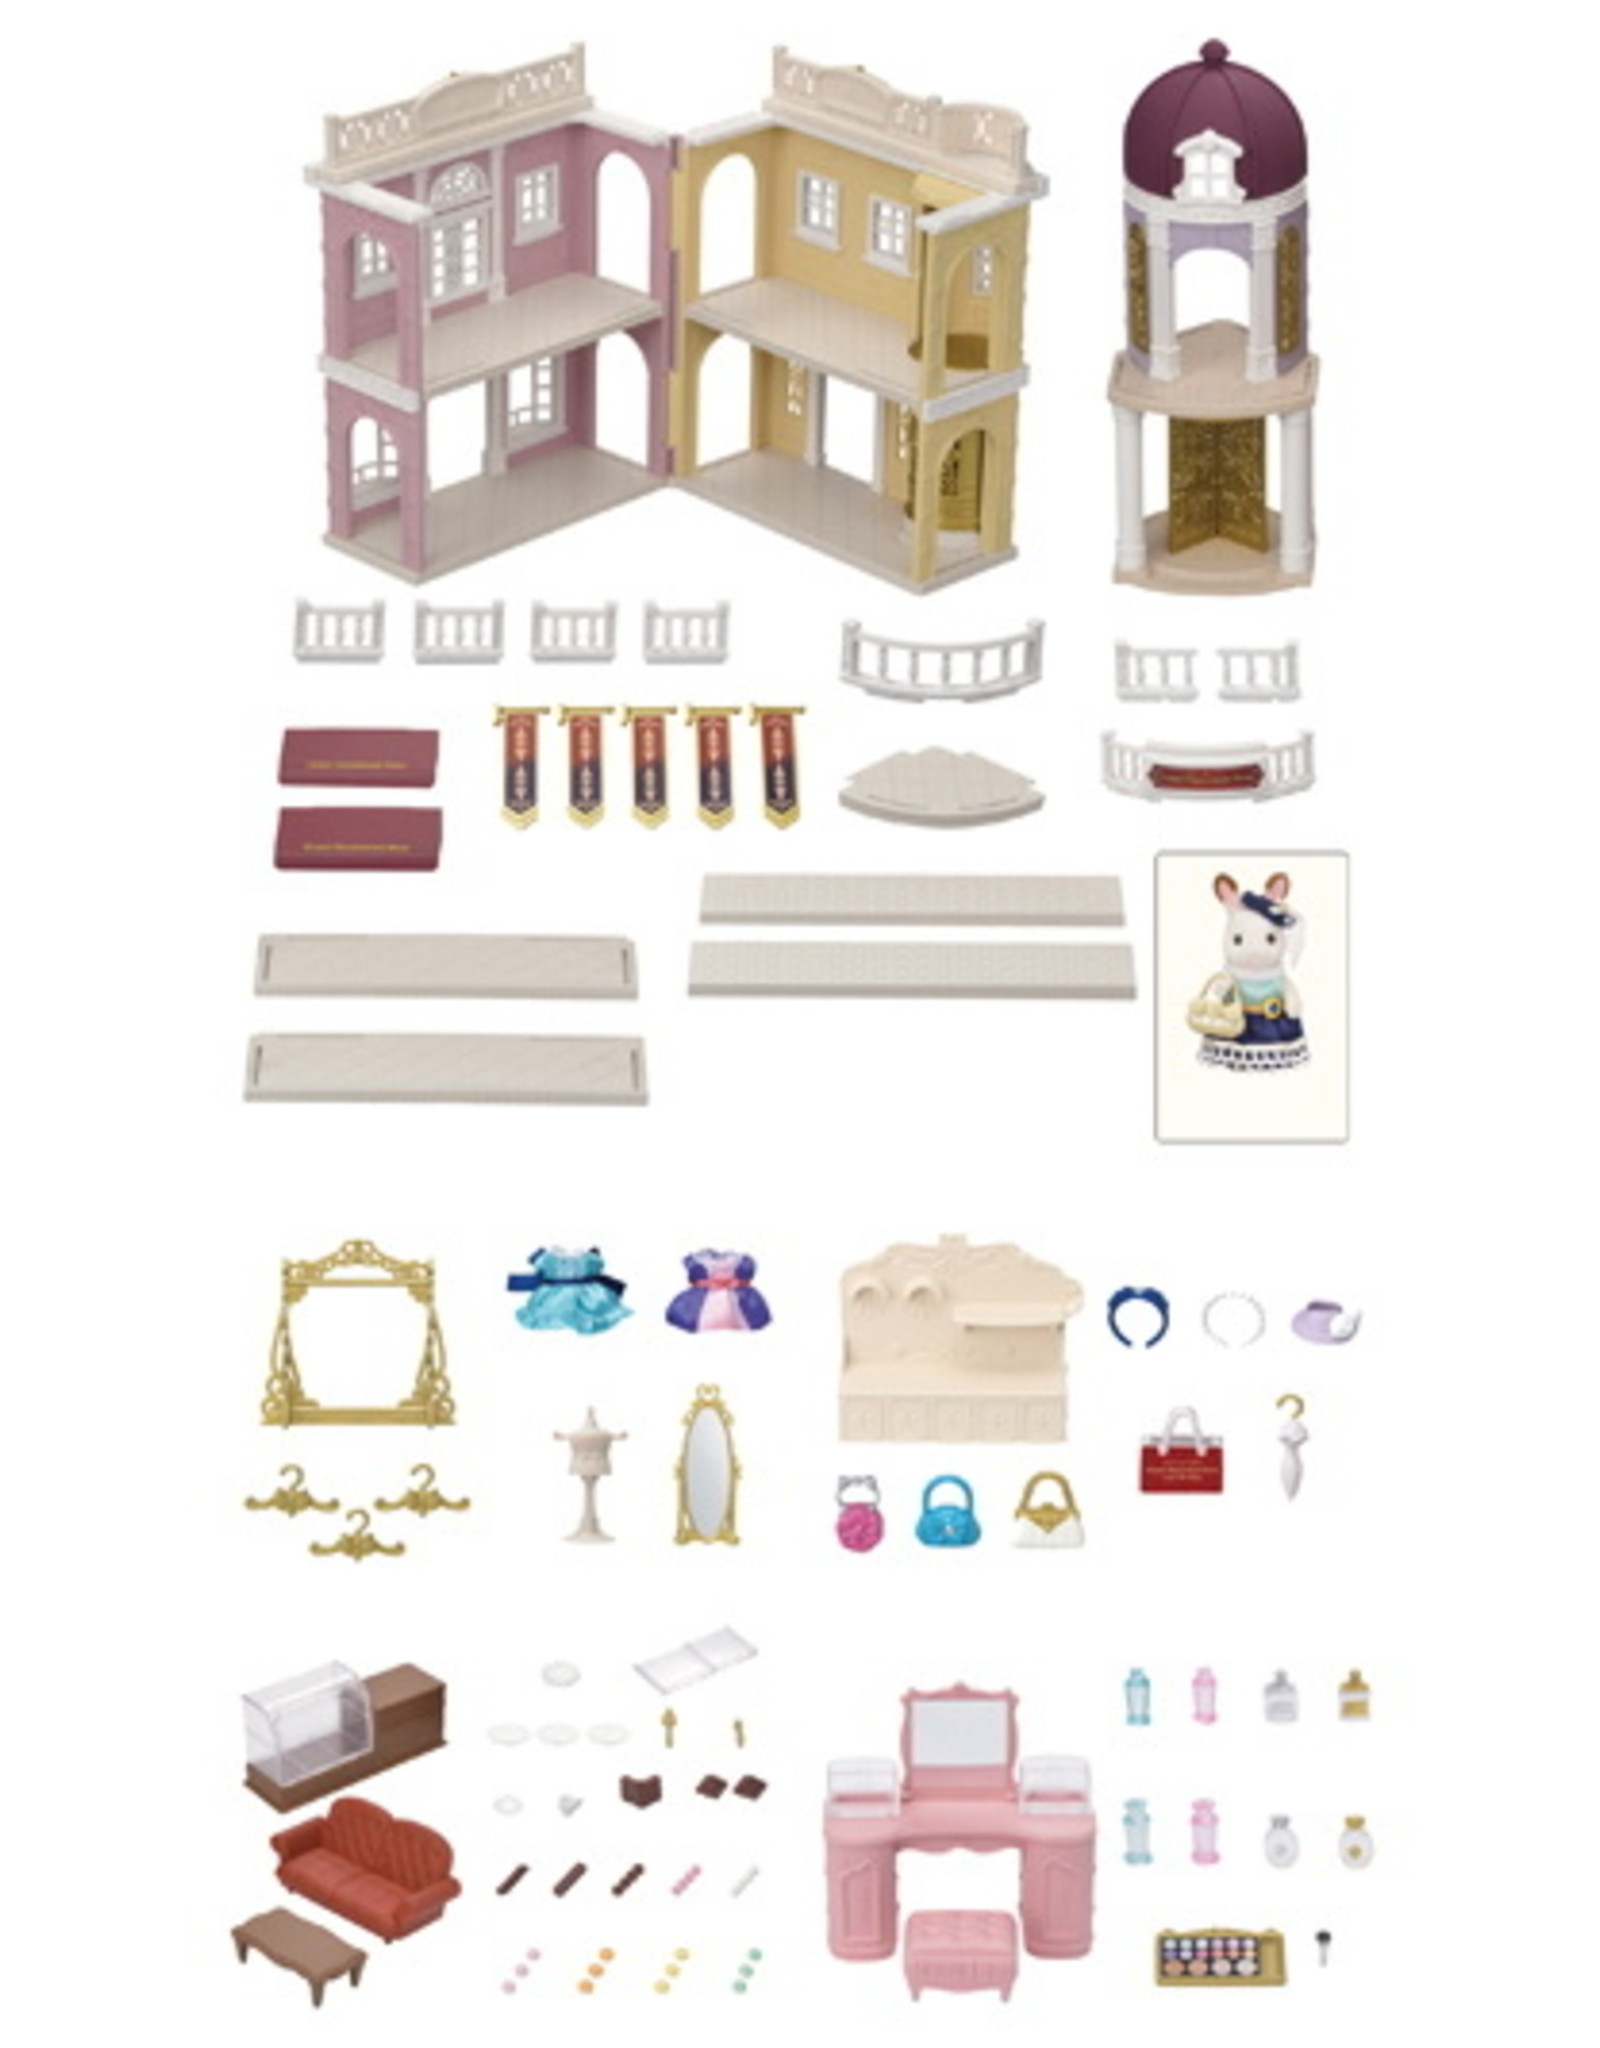 Calico Critters Calico Critters Grand Department Store Gift Set